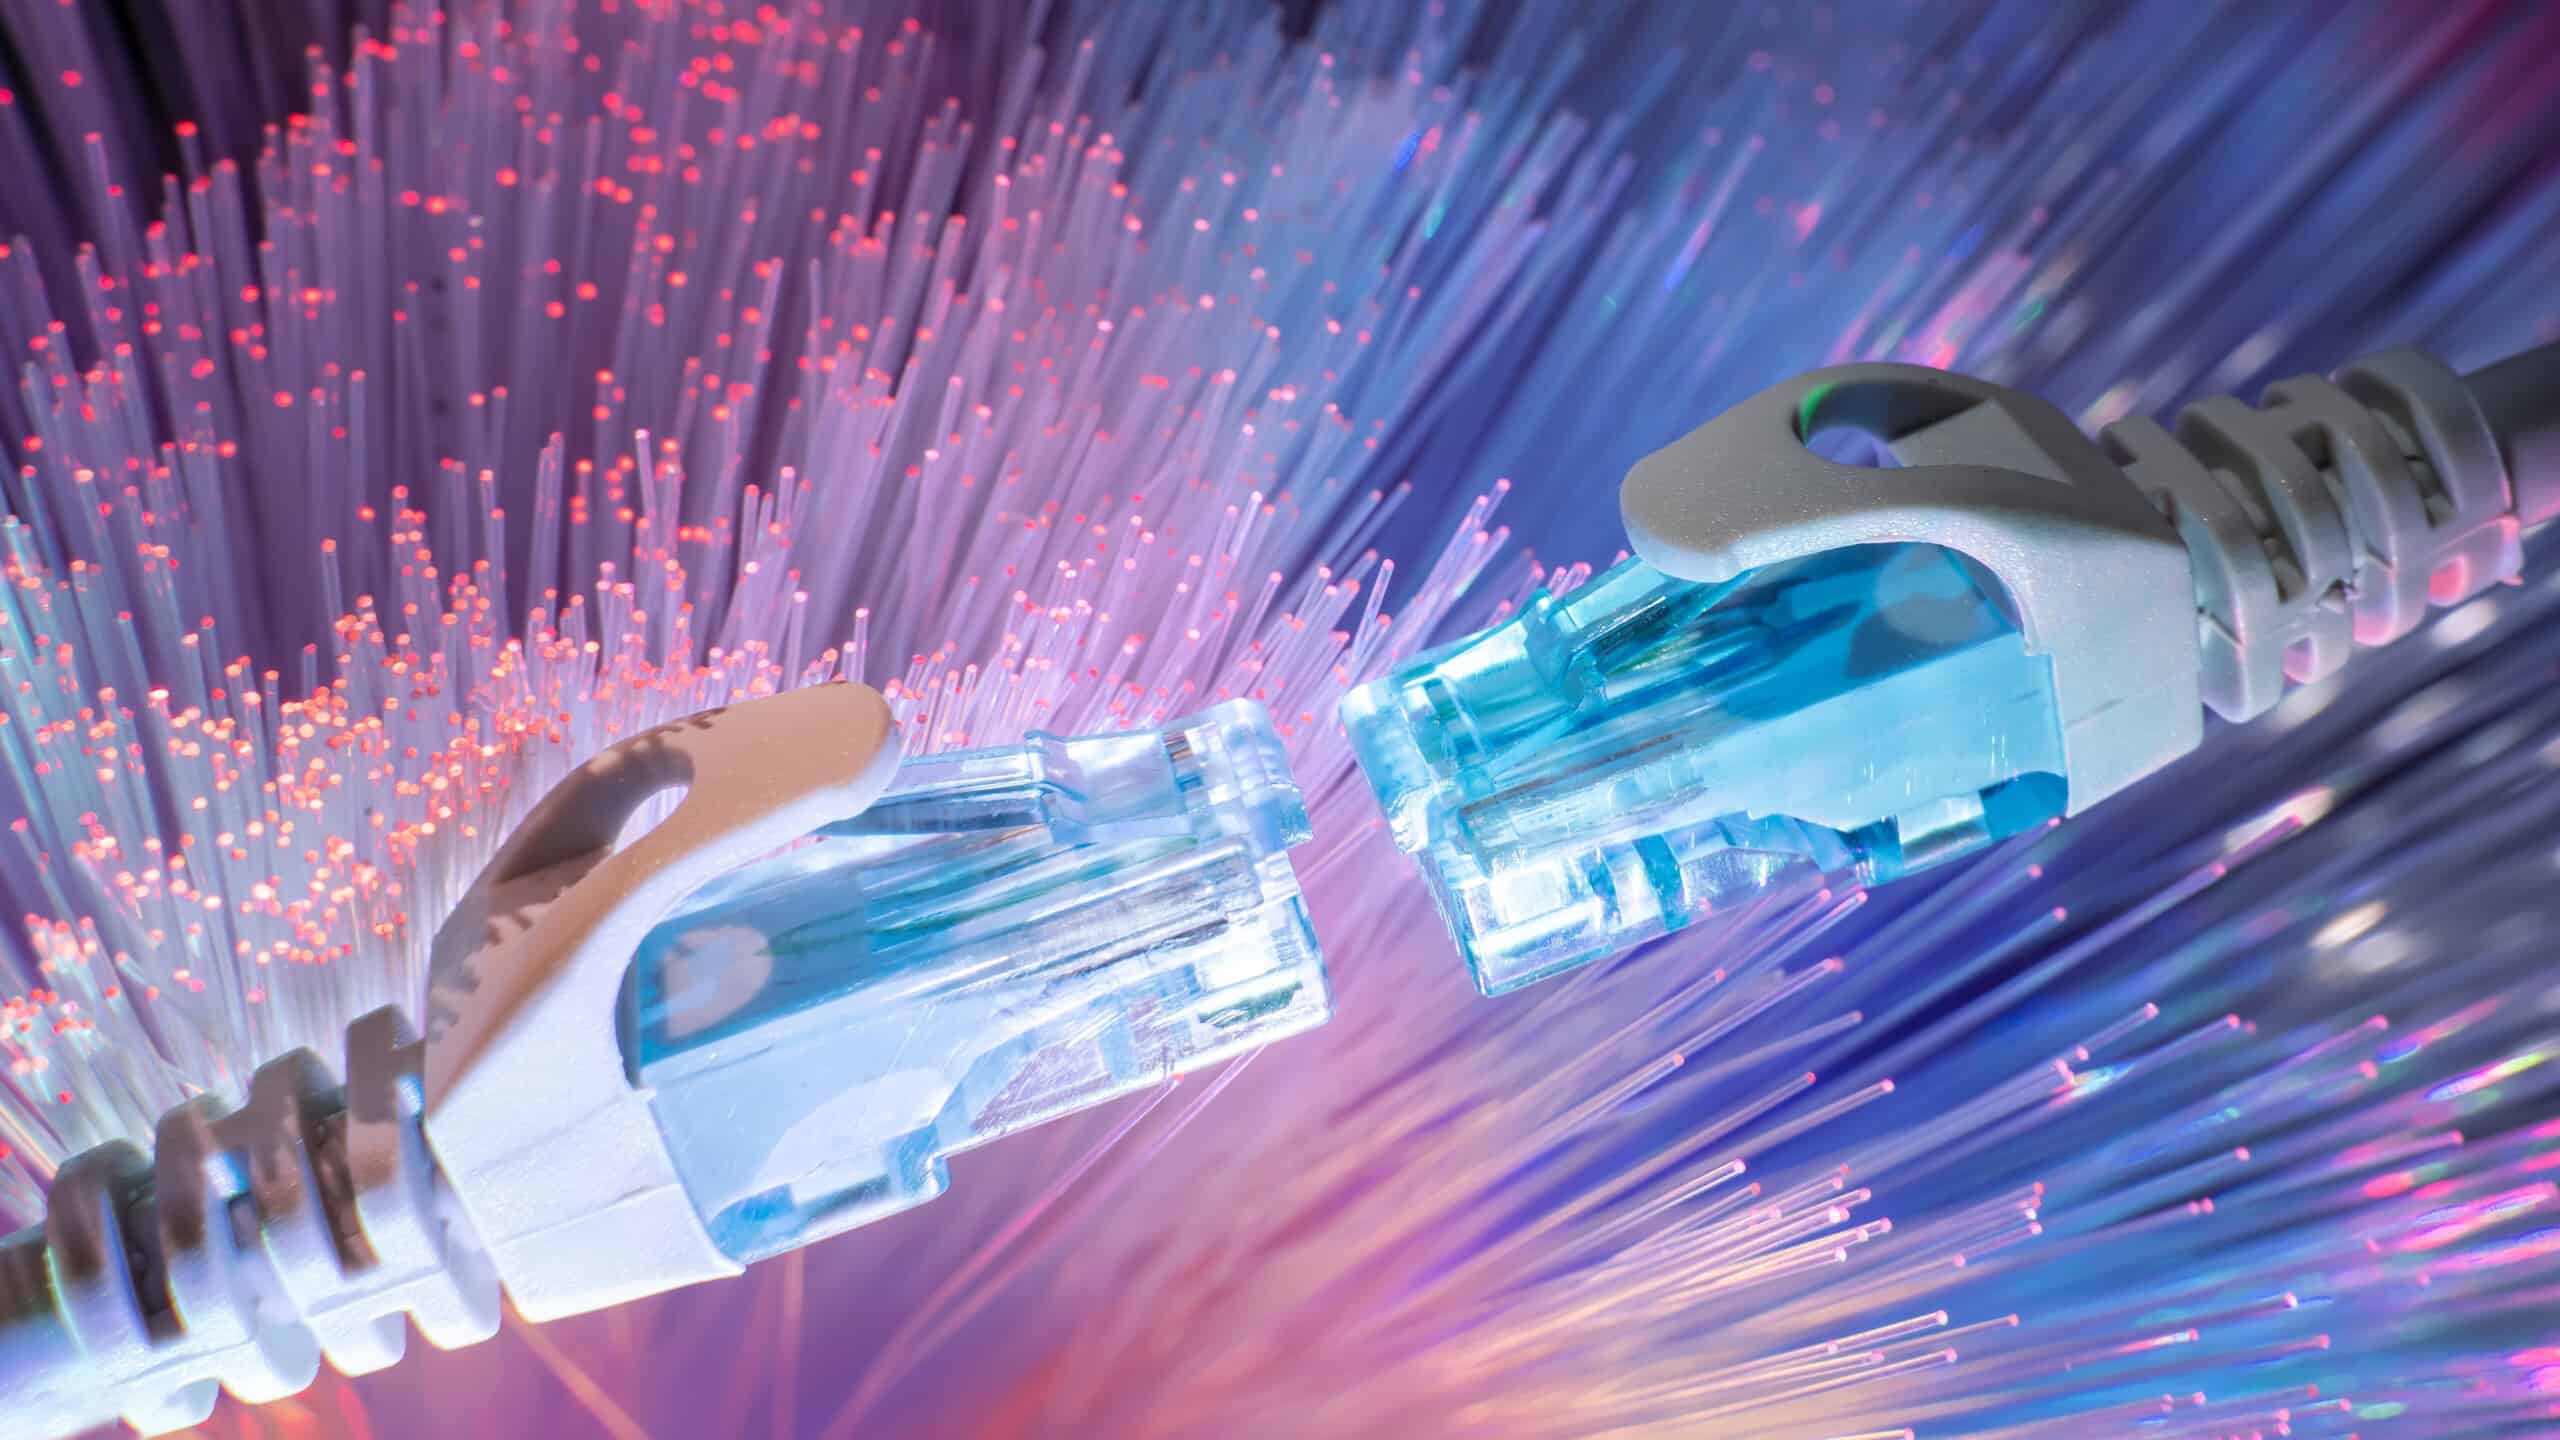 Two Ethernet cables almost touch each other with a background of fiber-optic cables.